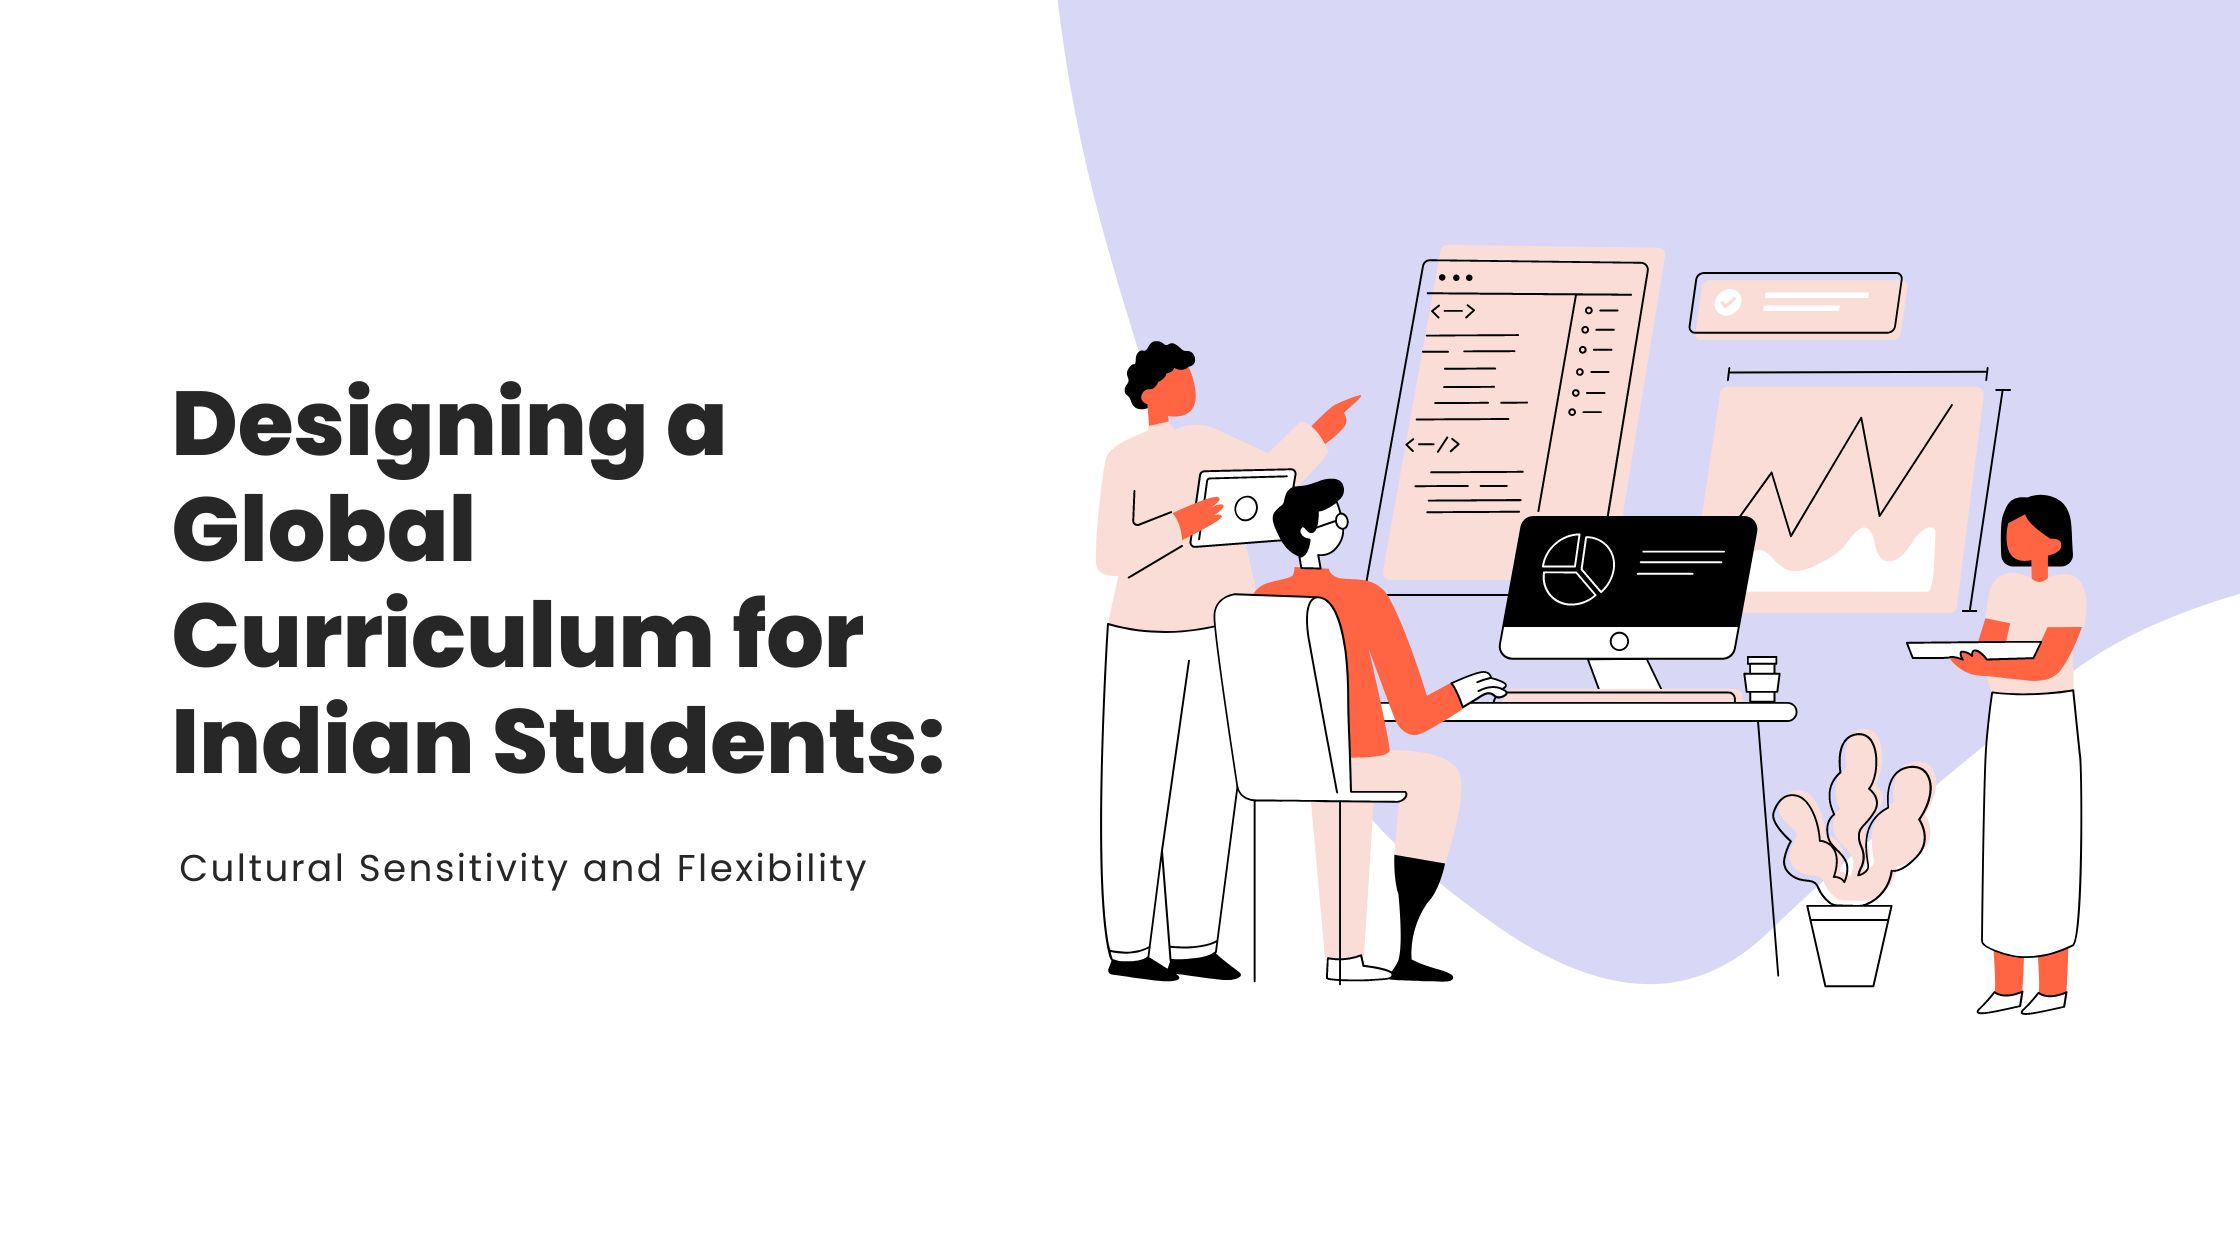 Designing a Global Curriculum for Indian Students: